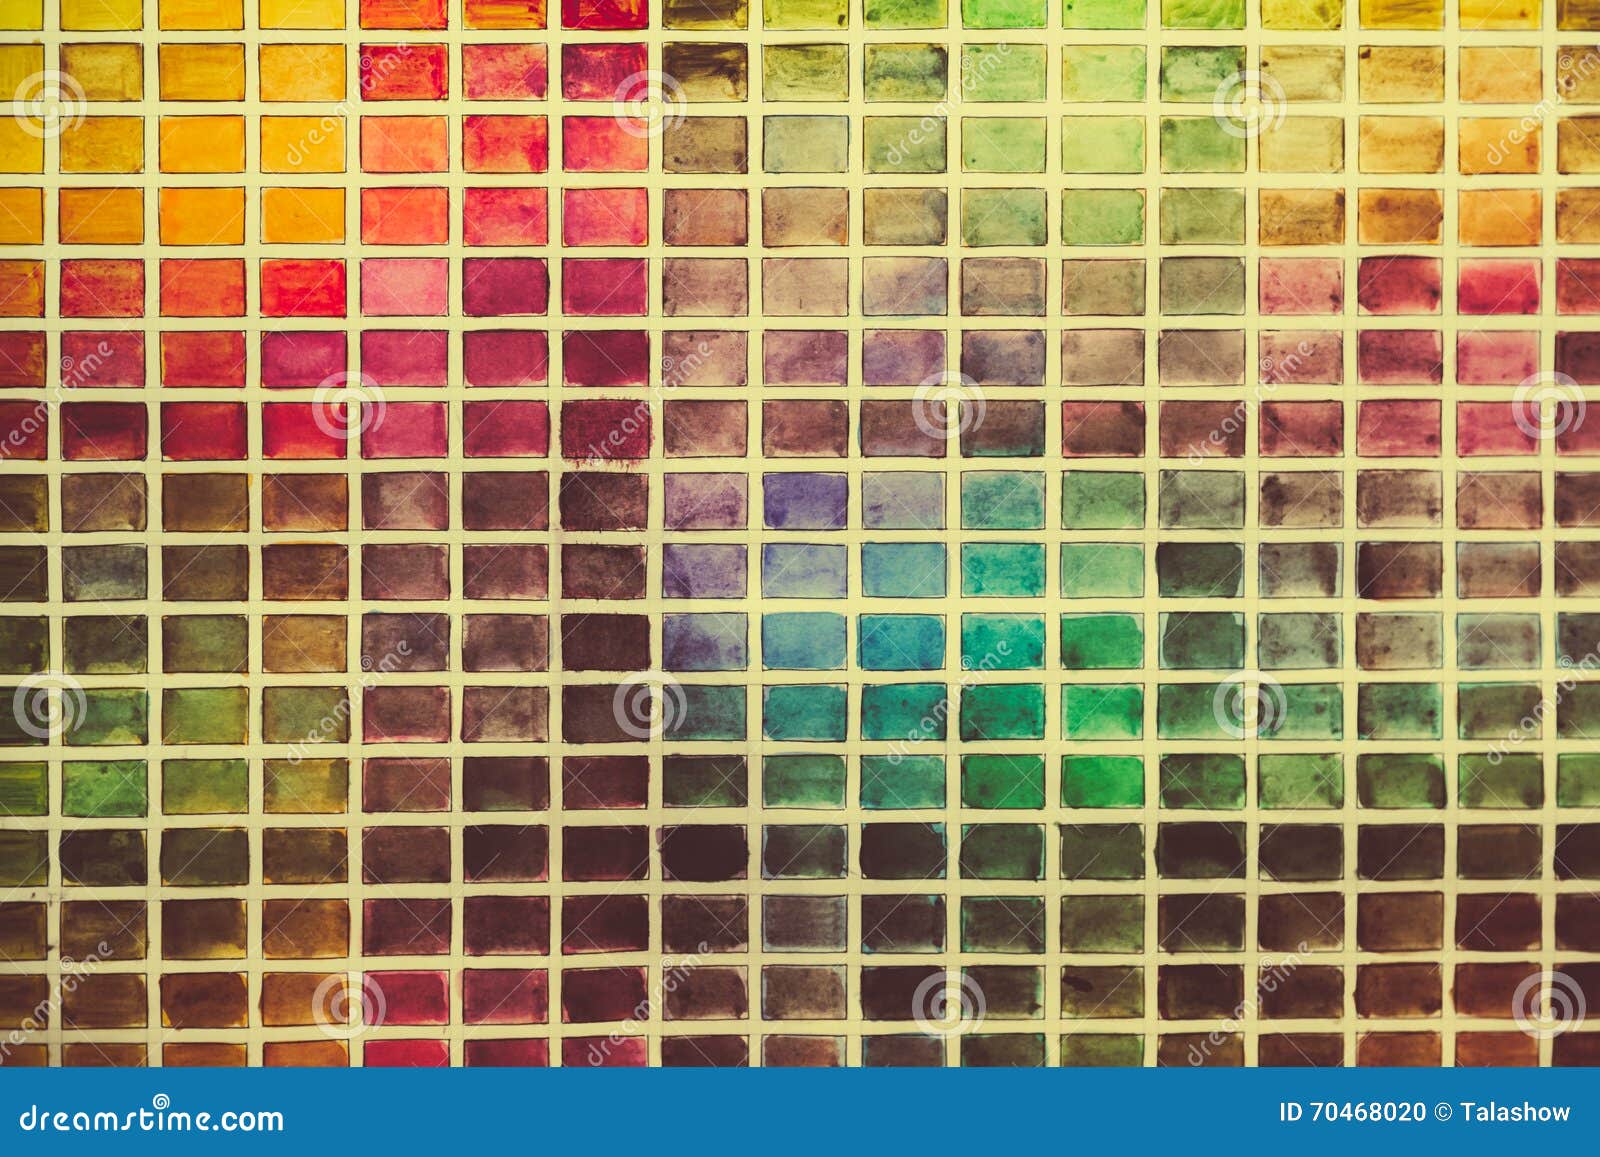 wall of the plurality of colored squares.